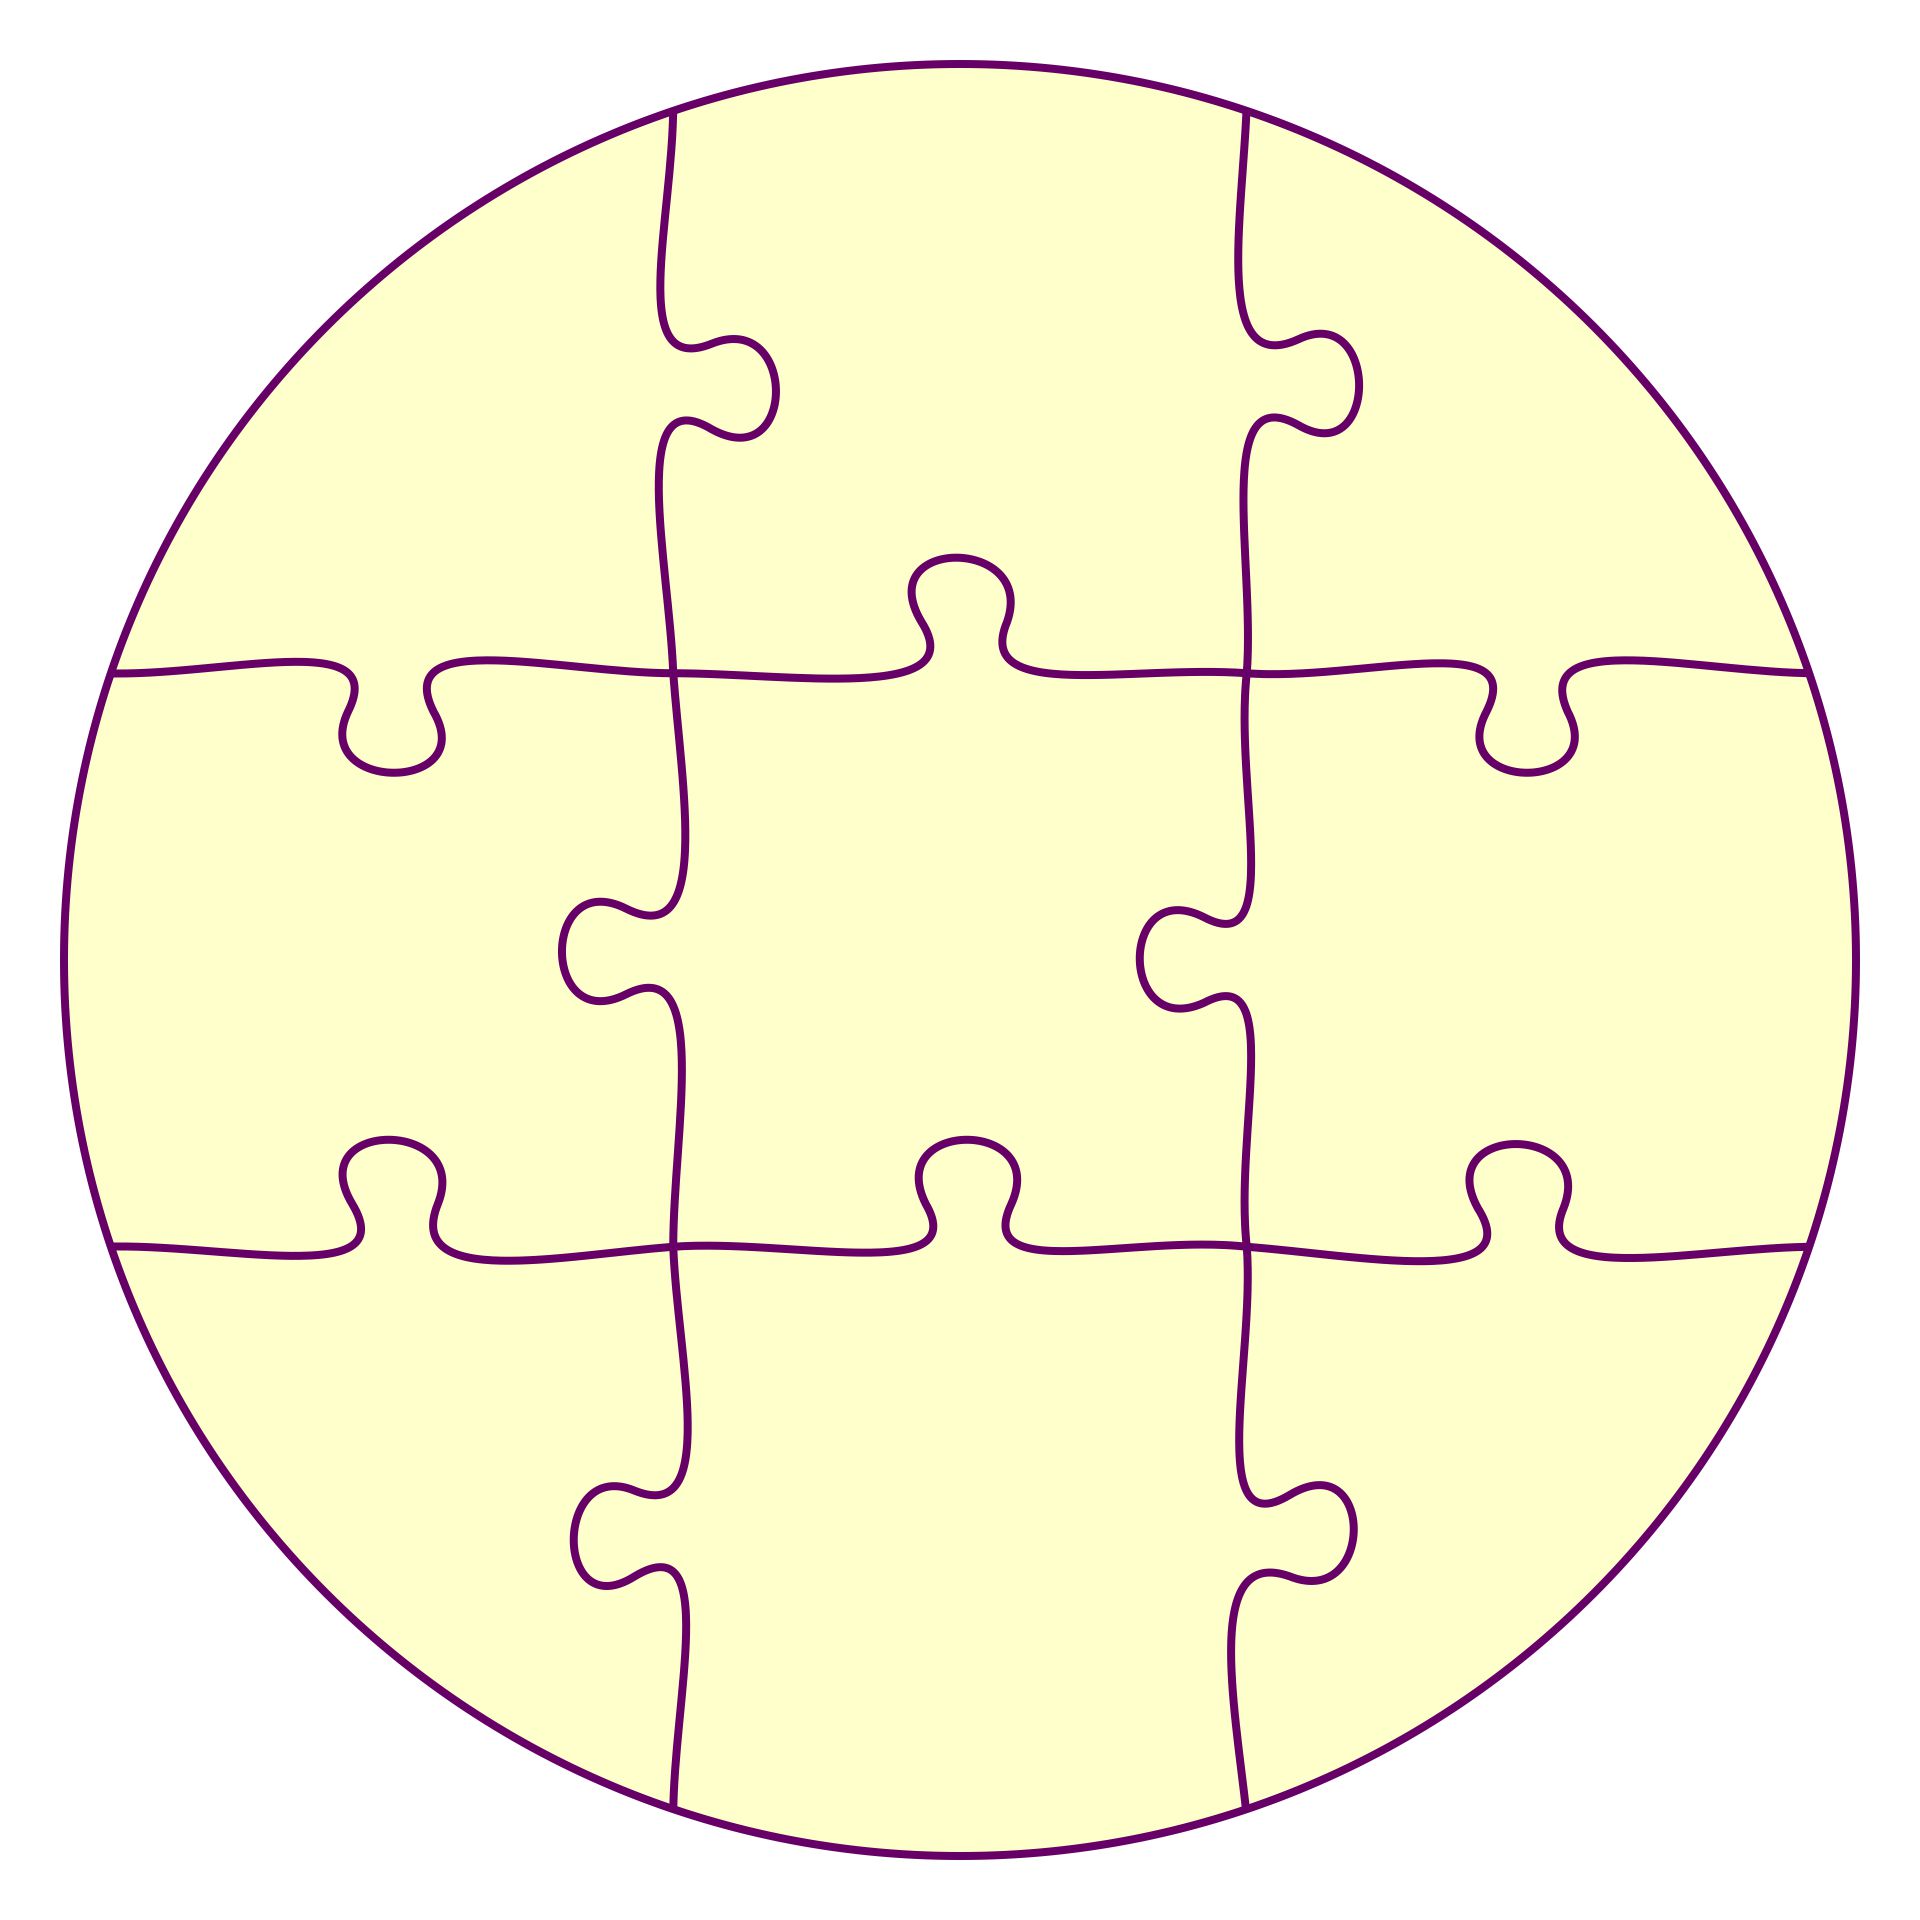 9 Pieces Jigsaw Puzzle Round Shape Template Printable